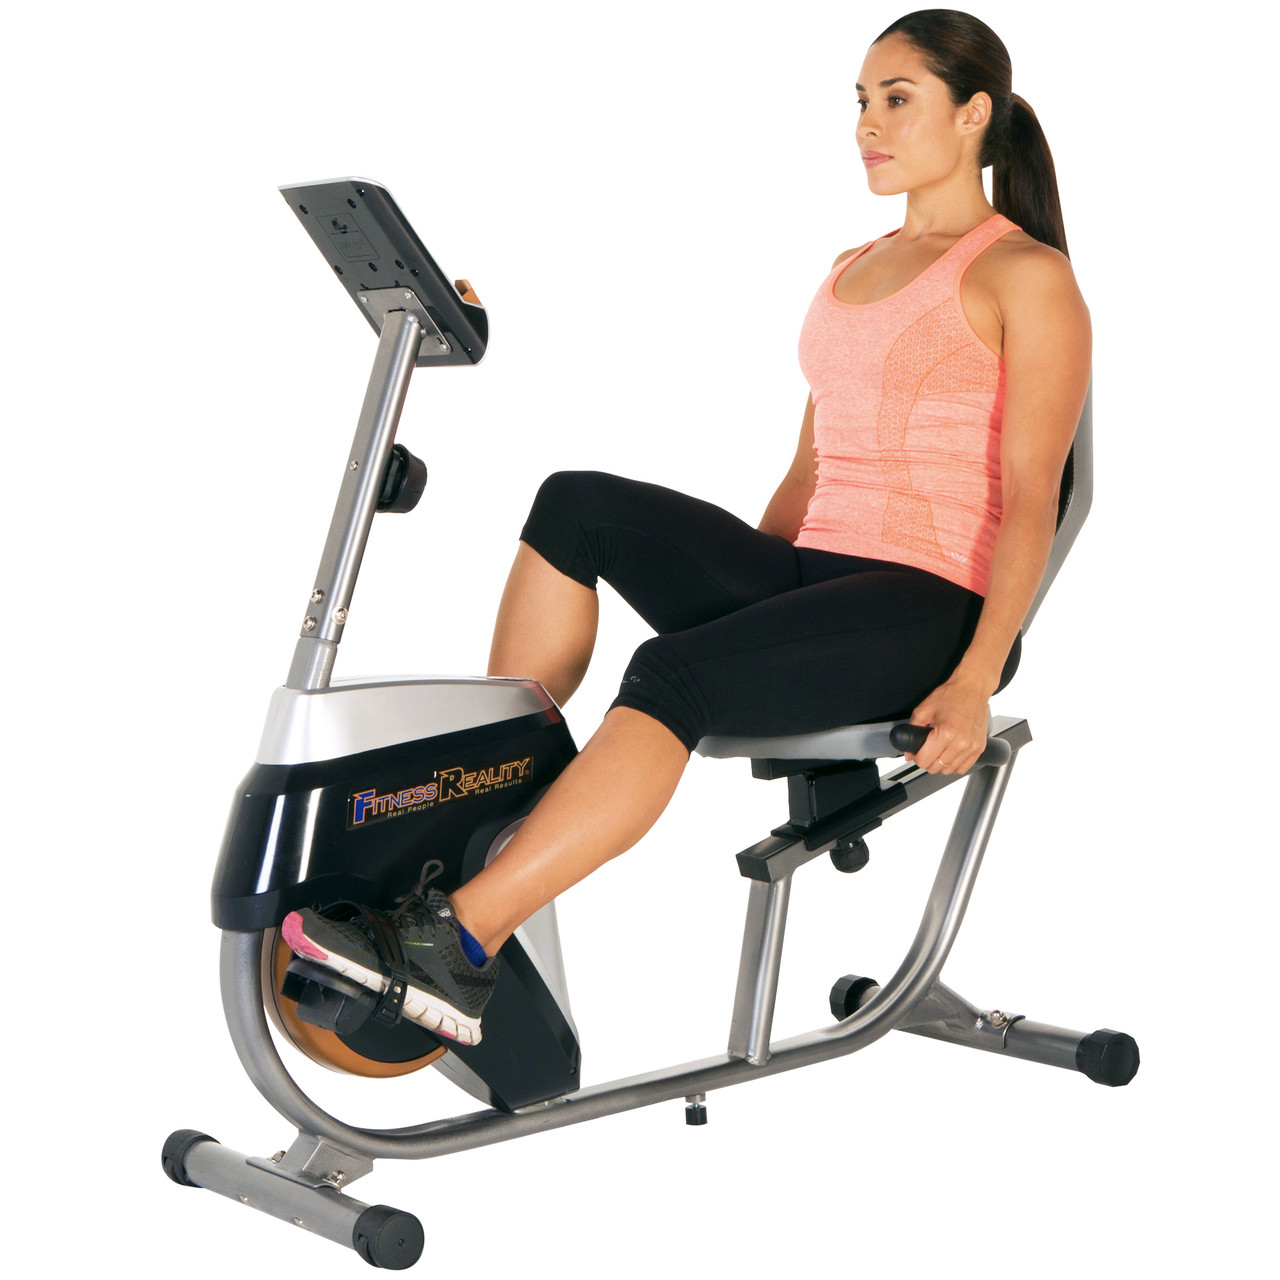 fitness reality r4000 magnetic tension recumbent bike with workout goal setting computer